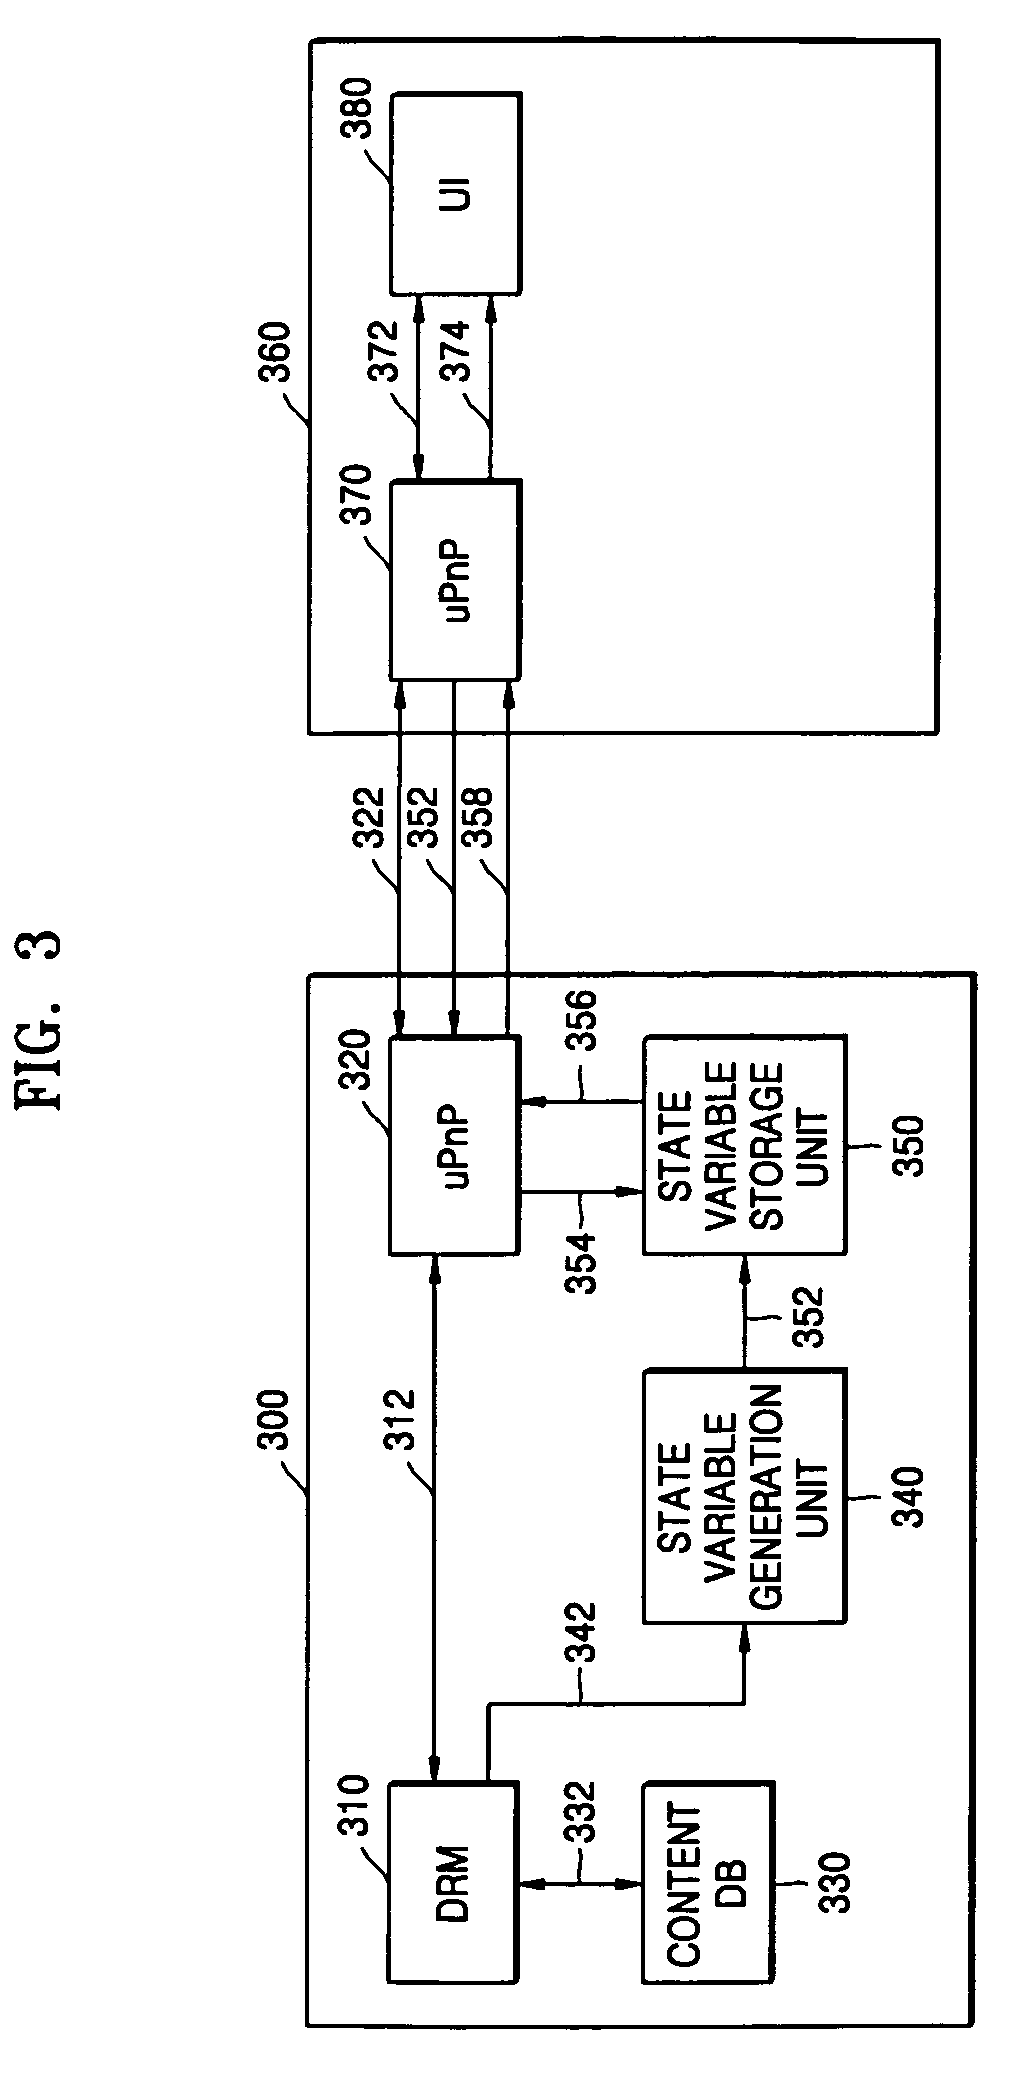 Apparatus and method for reporting operation state of digital rights management